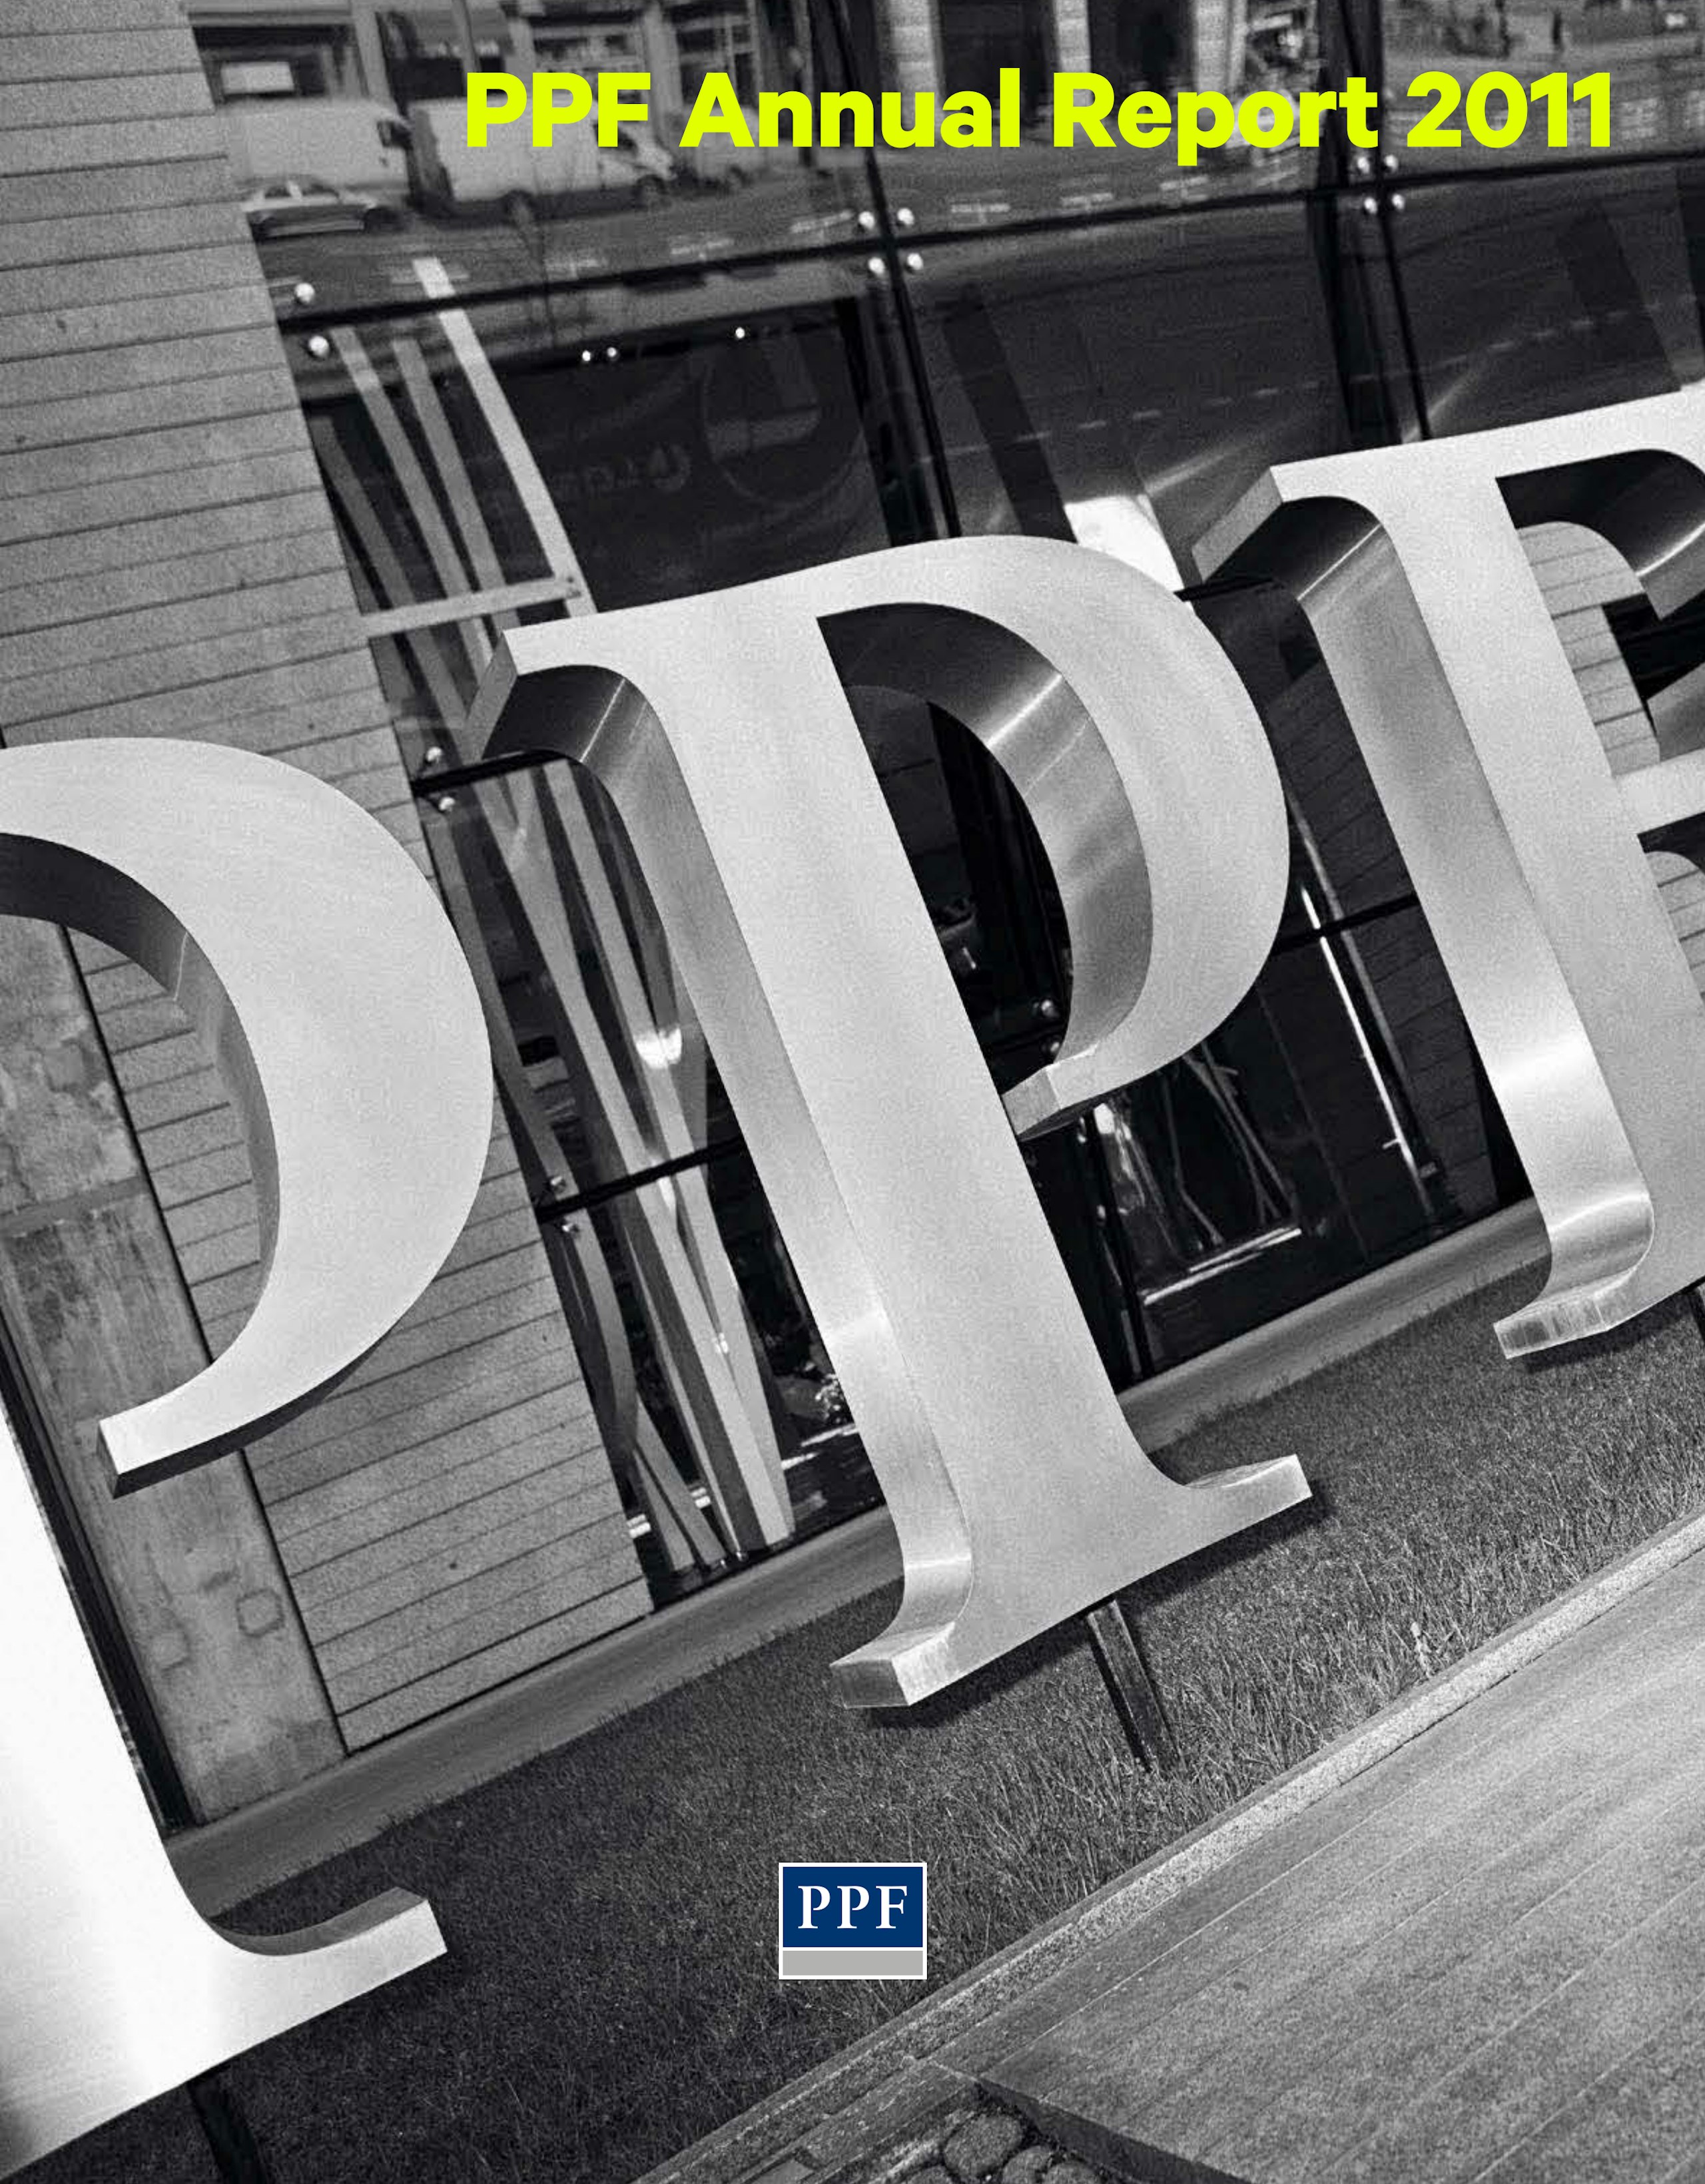 PPF Group Annual Report 2011